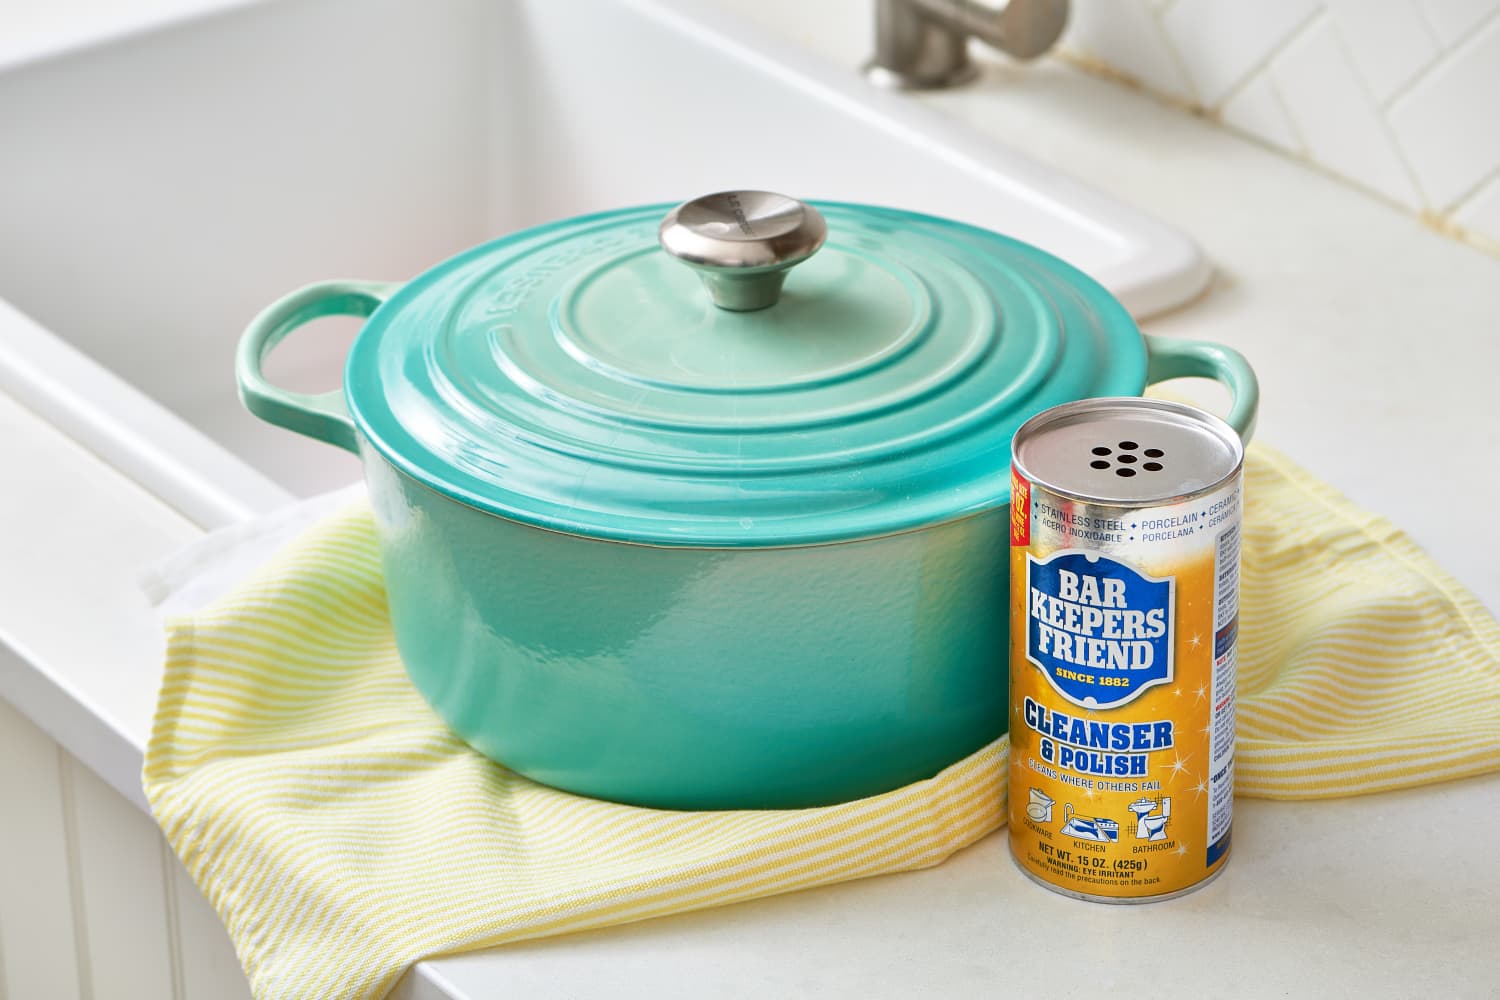 8 Things You Should Never Clean with Bar Keepers Friend